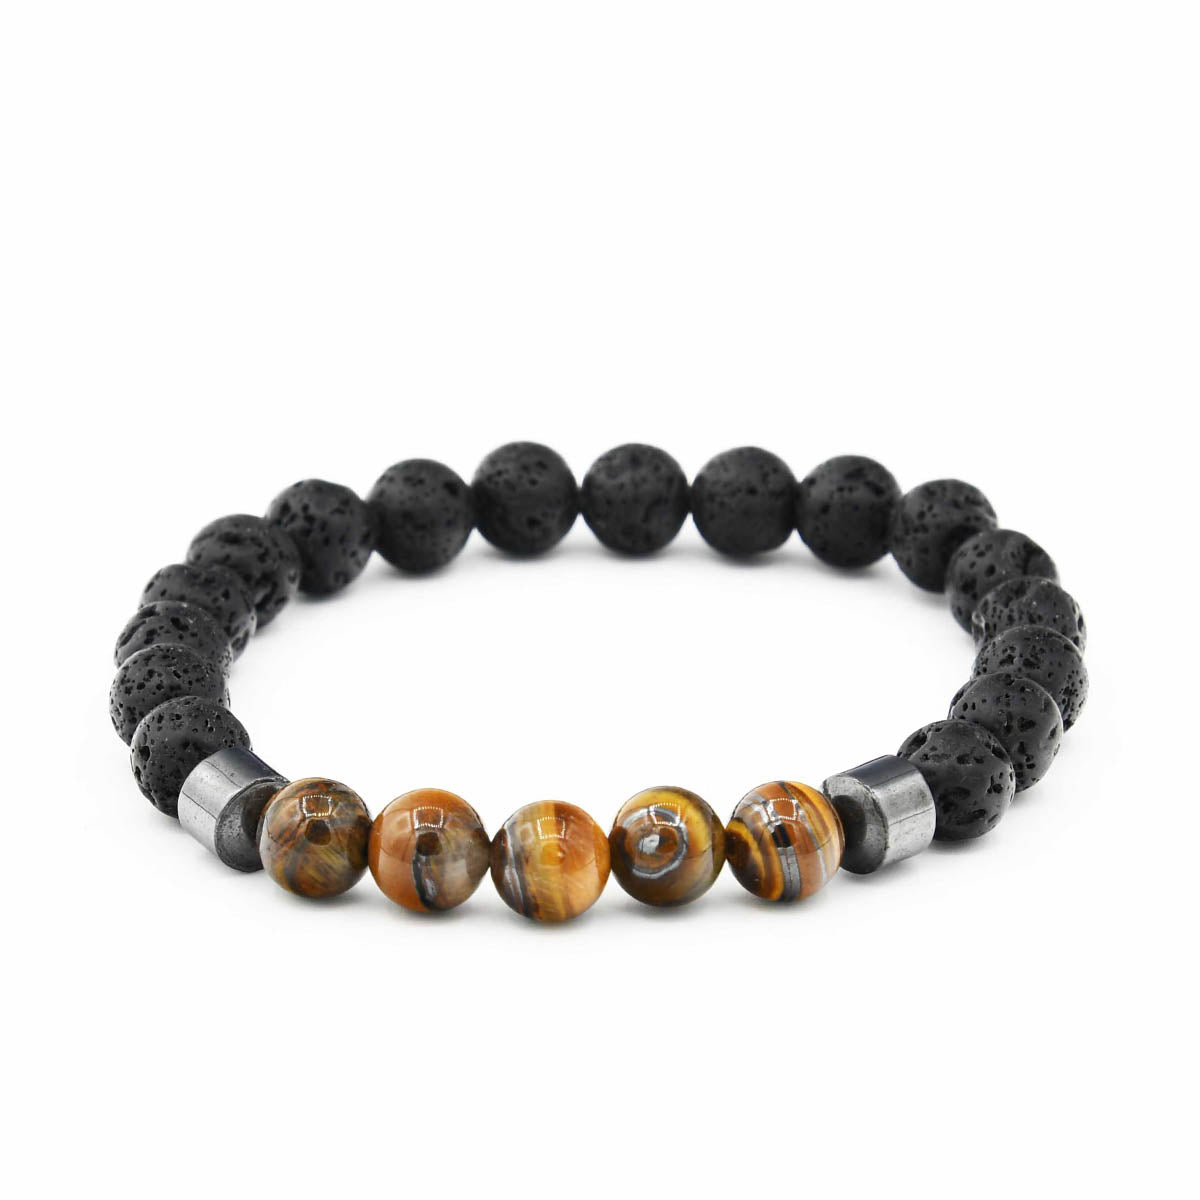 Buy WIGERLON Adjustable Natural Lava Rock Stone Beads Essential Oil Anxiety  Diffuser Bracelet 10 Chakras Bracelet for Men and Women Color Howlite at  Amazonin